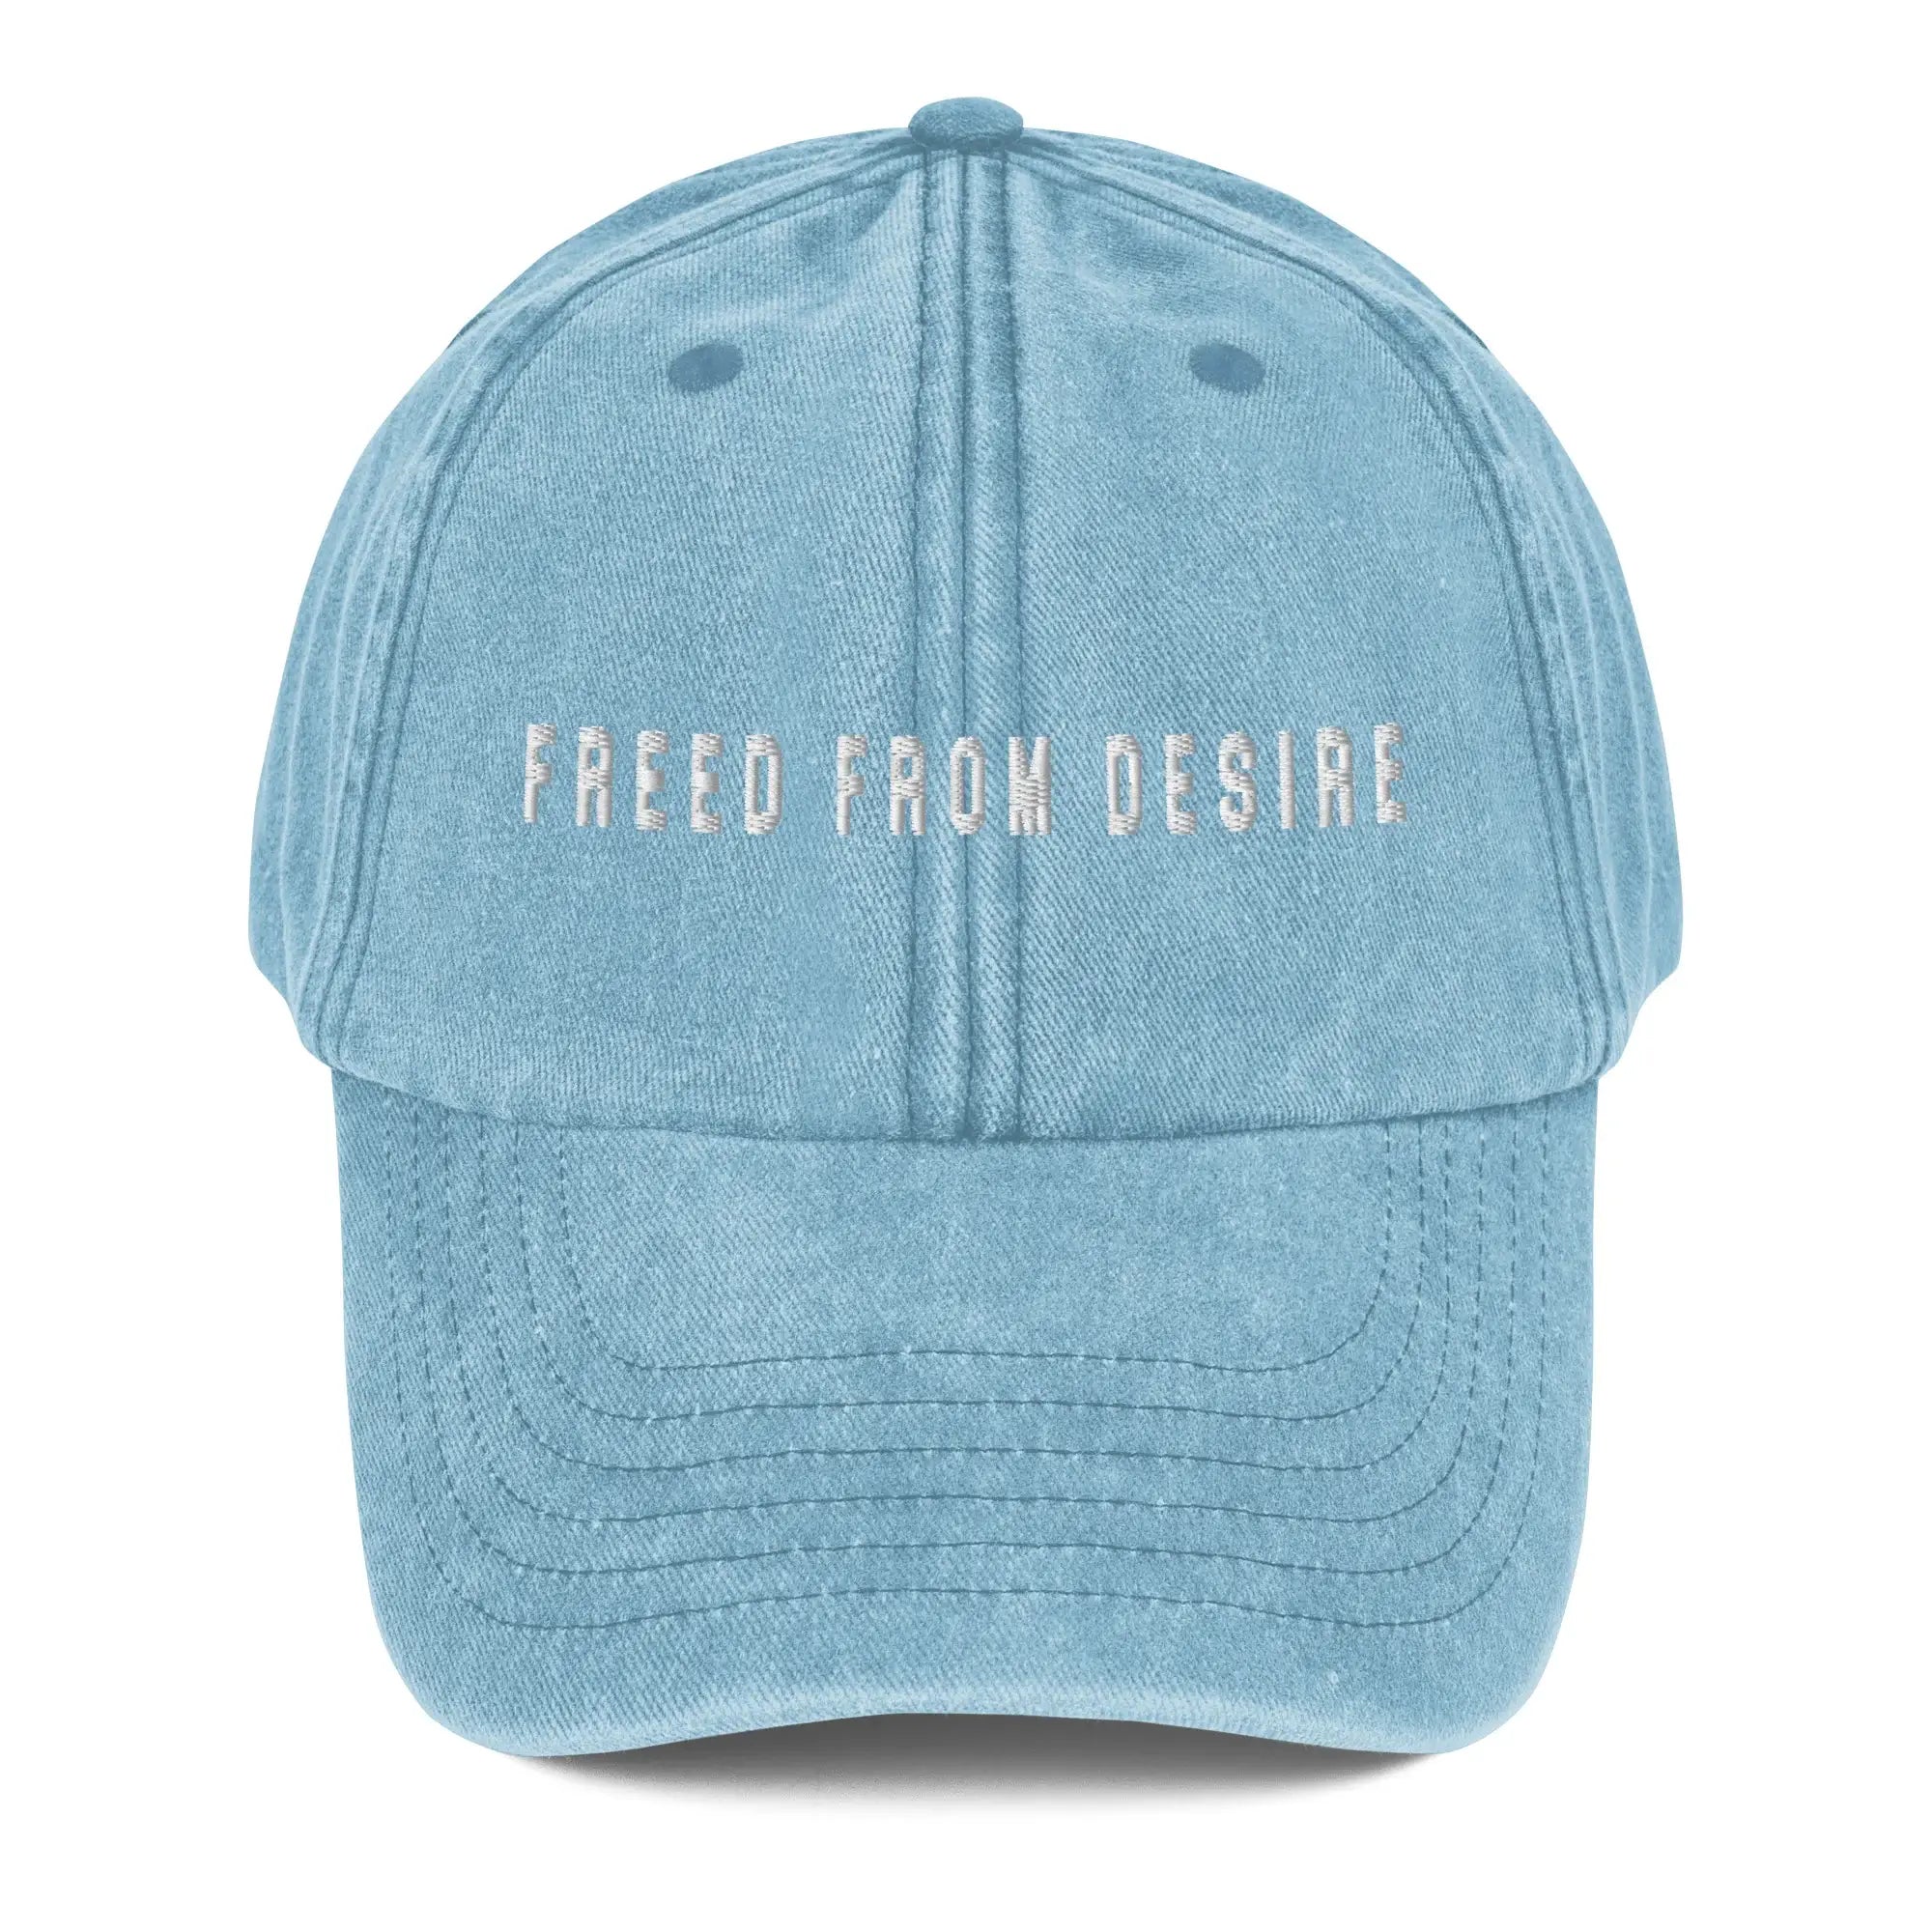 Freed From Desire {Gorra Vintage}